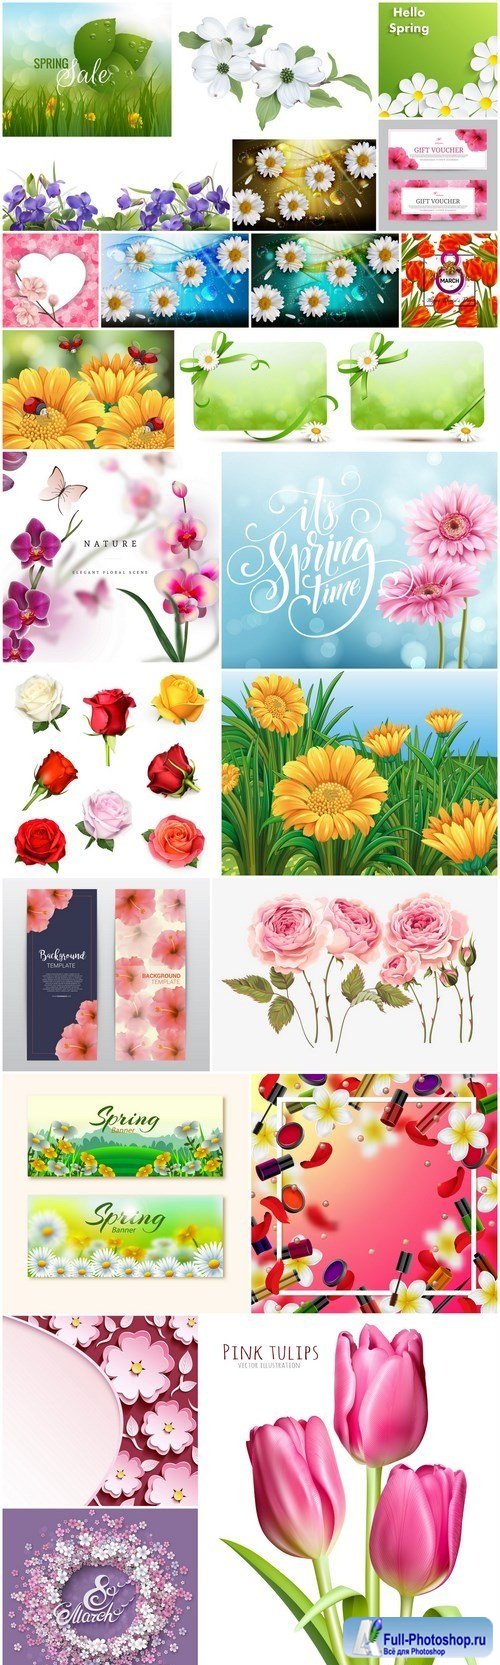 Spring Flowers Background #2 - 25 Vector